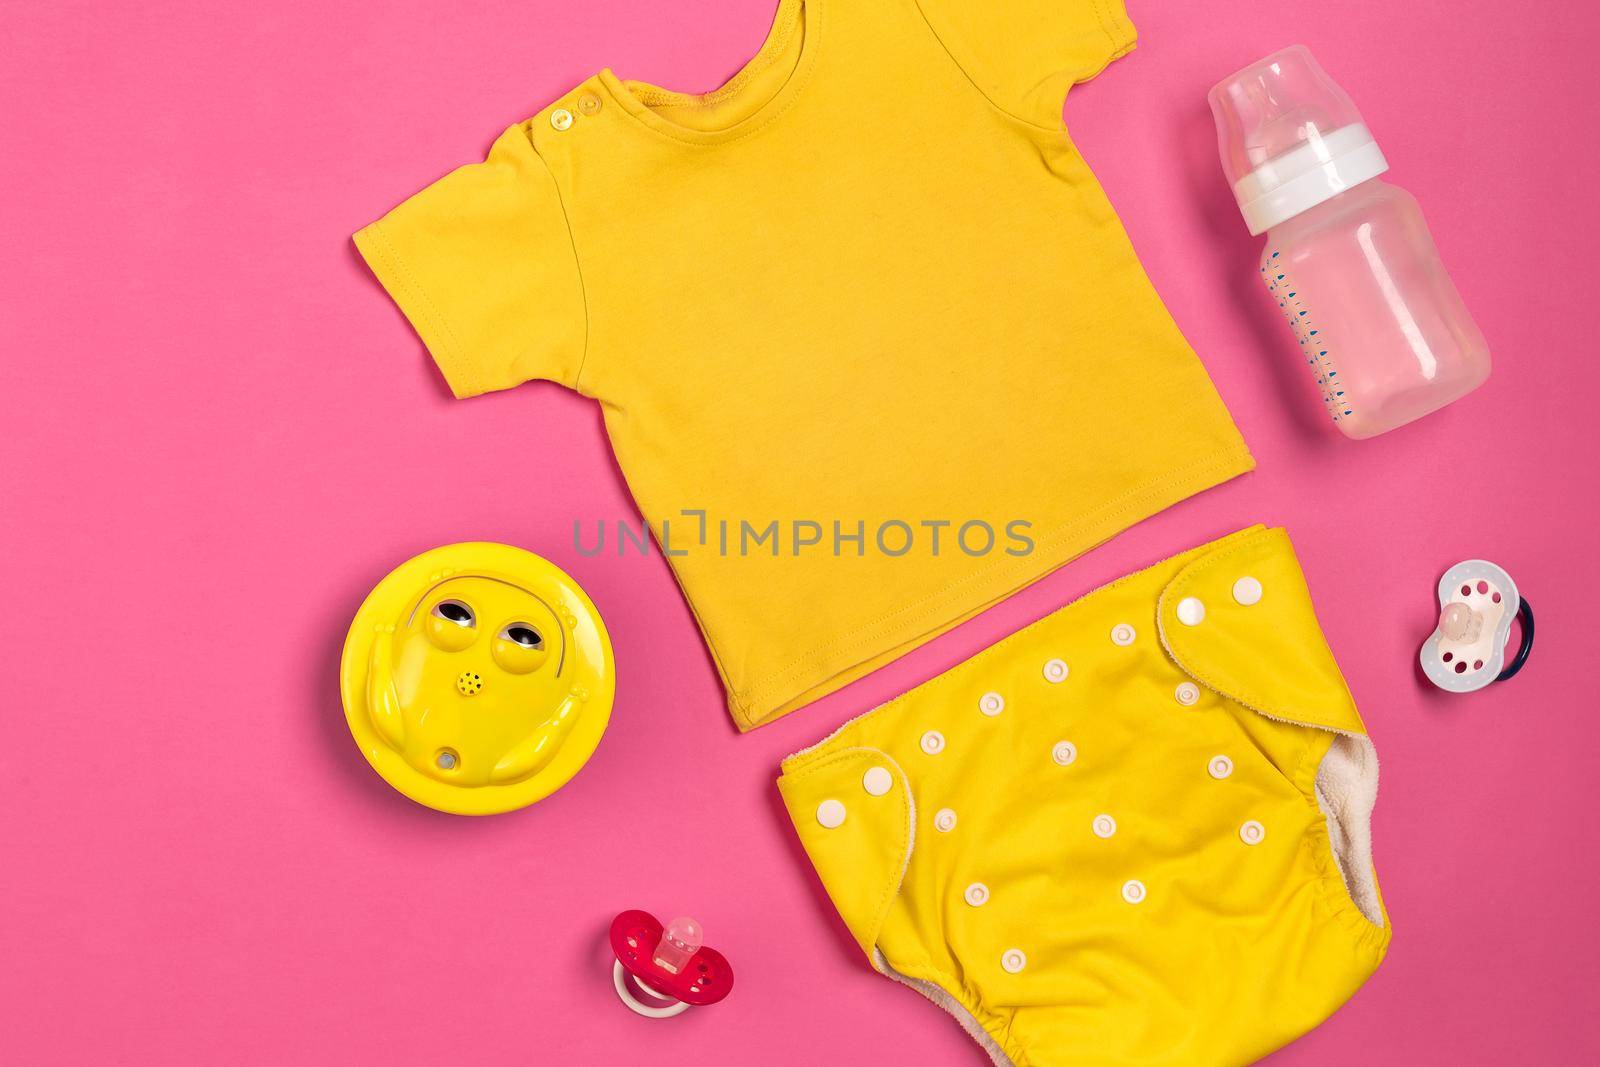 Things for babies on pink background by nazarovsergey